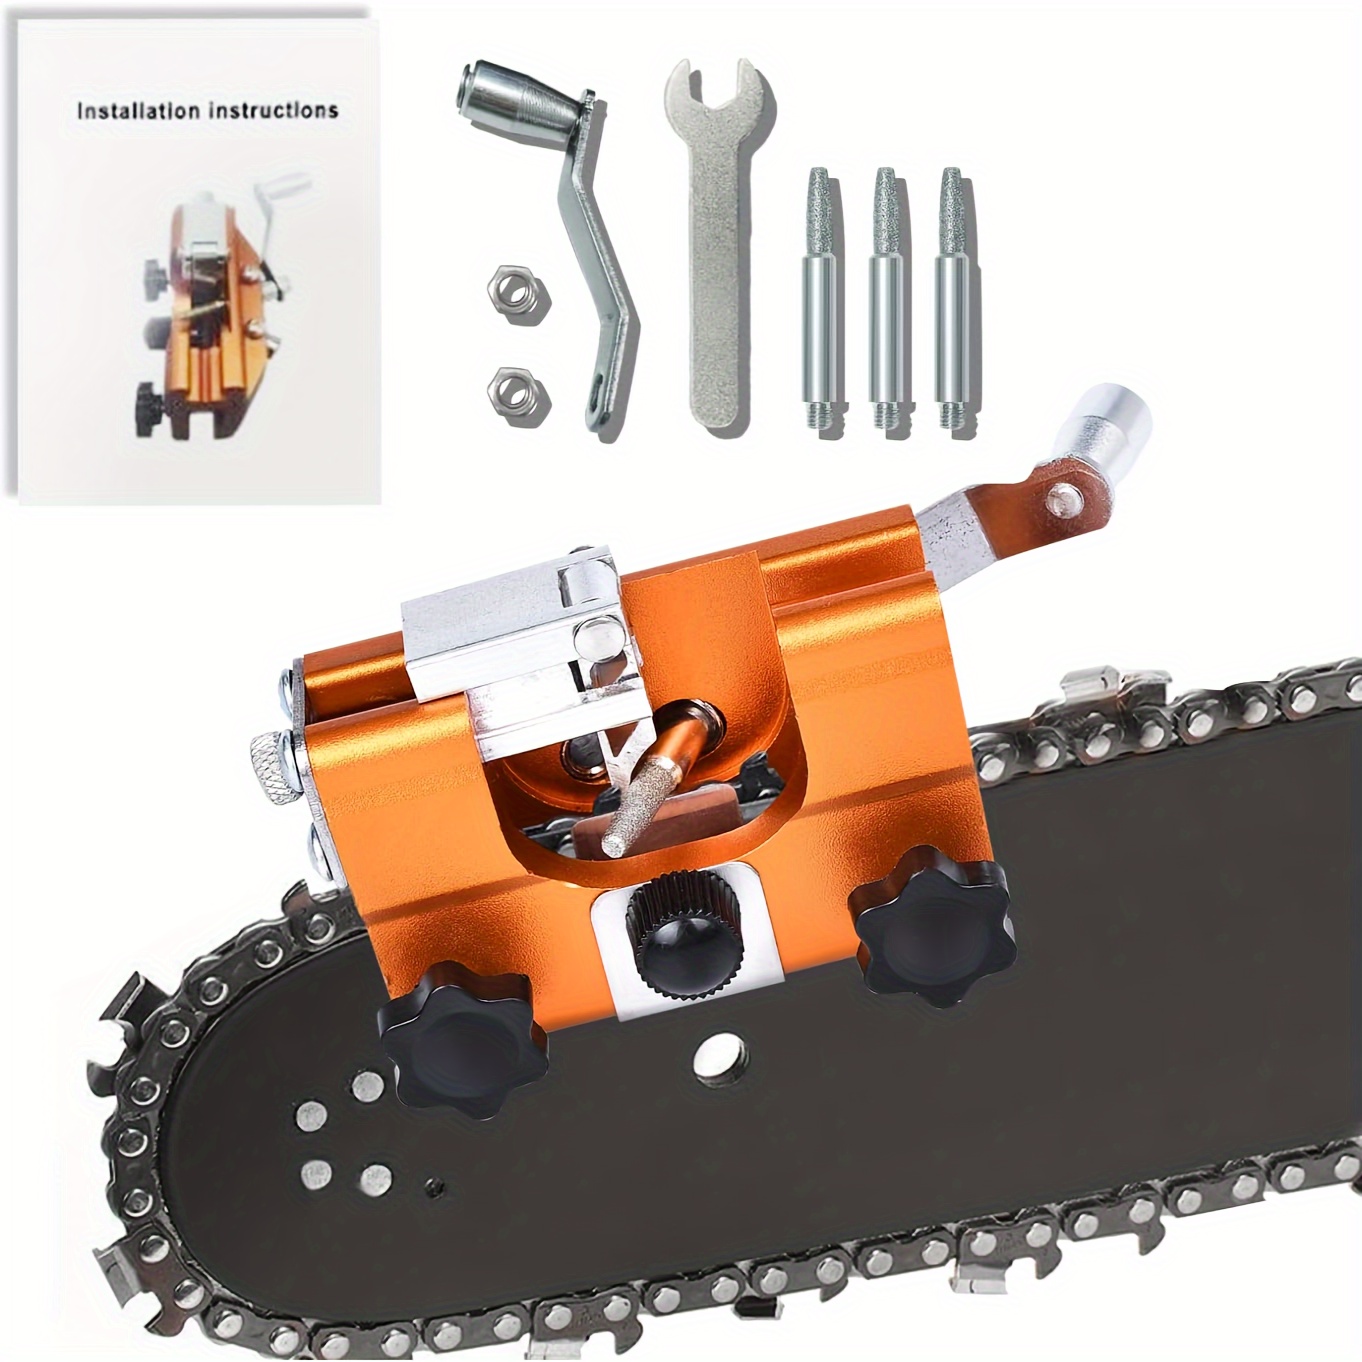 

Portable Chainsaw Sharpener Set With 3 Grinding Stones, 2 Nuts, 1 Wrench - Manual Power Source Chain Saw Blade Sharpener Tool Kit For Field Sharpening